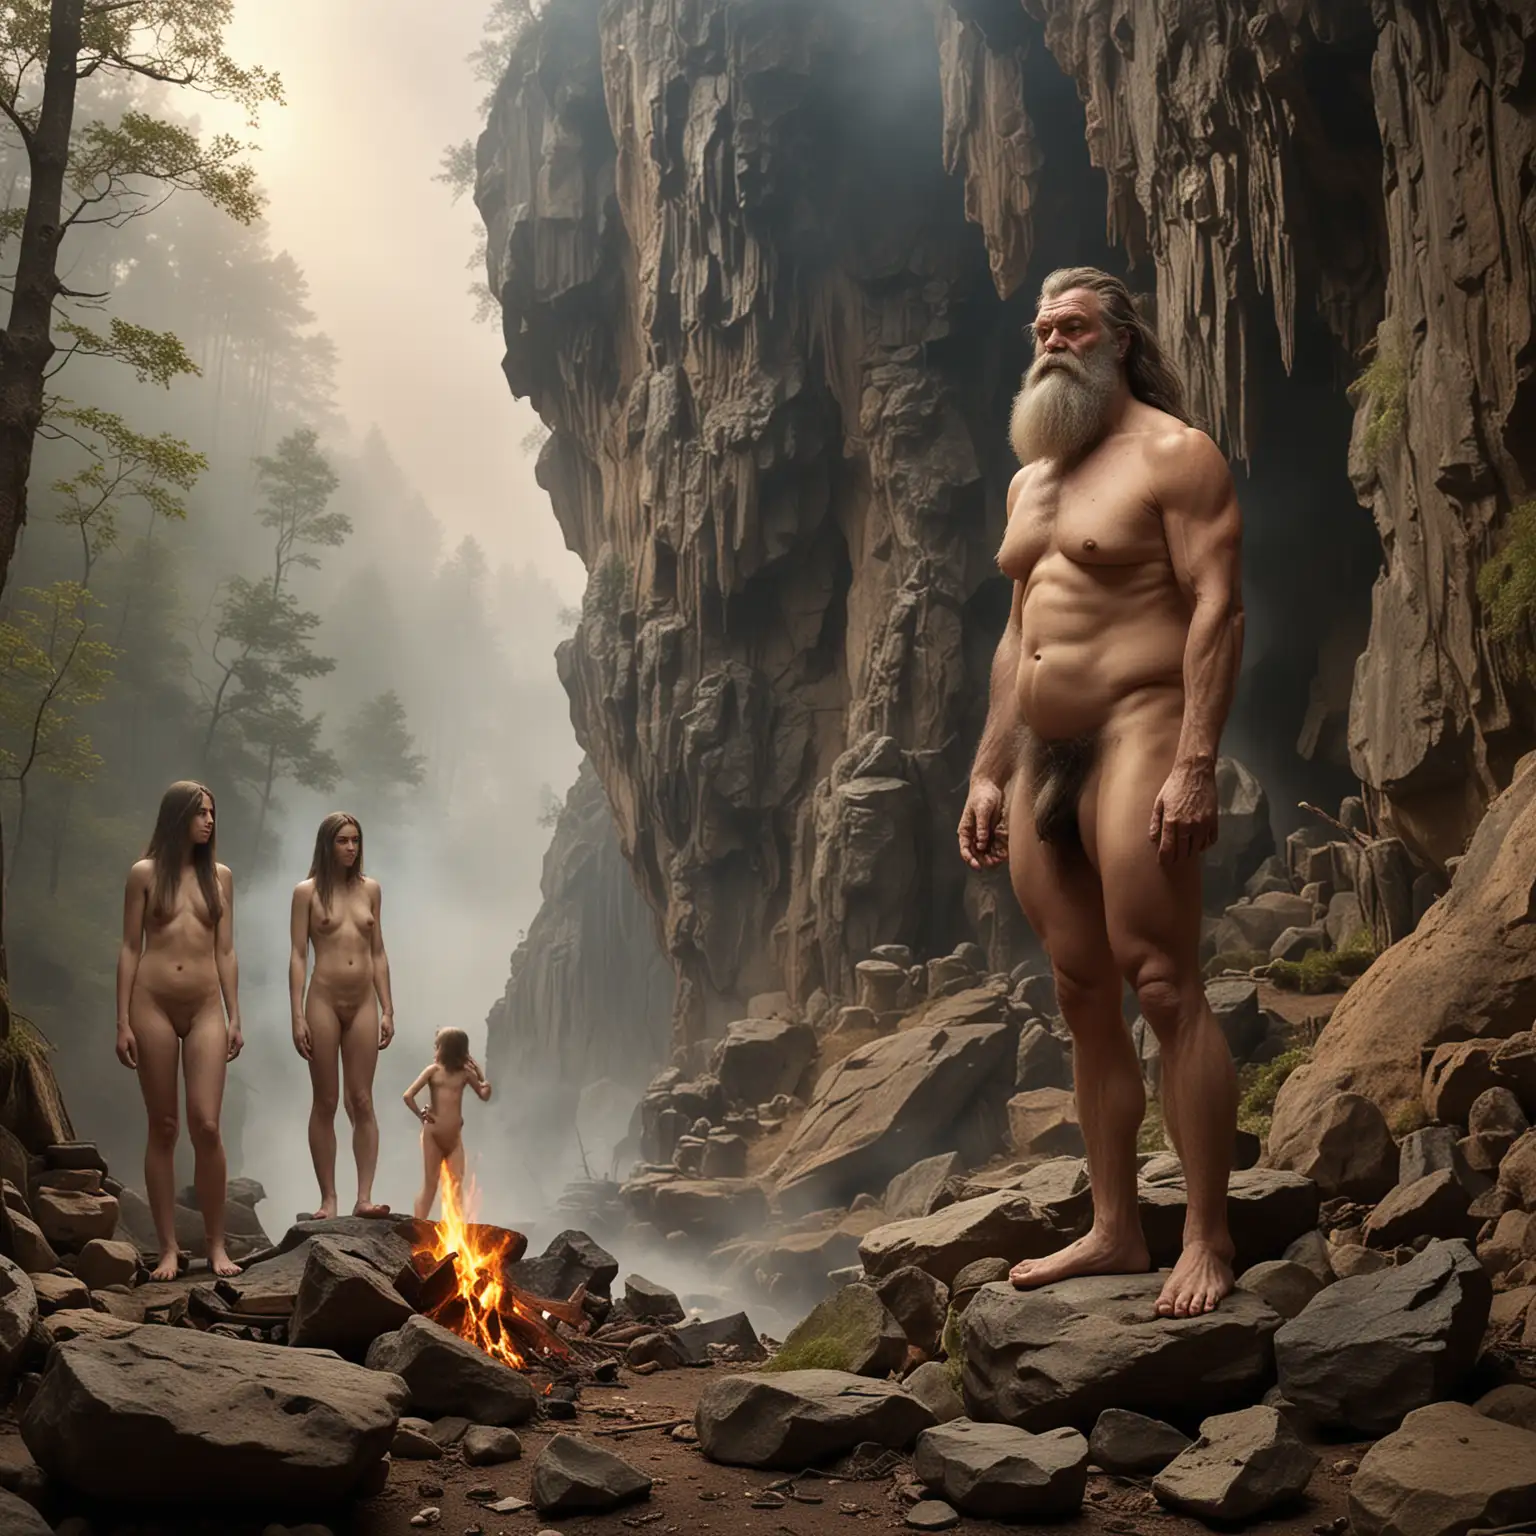 One very large muscular male Hill giant, forest cave, cooking fire, large feet, large hand, nude, fat, primitive, hairy, long beard, old age, standing on rock, misty, with three 18-year-old nude human females who are smaller than a quarter of his size 